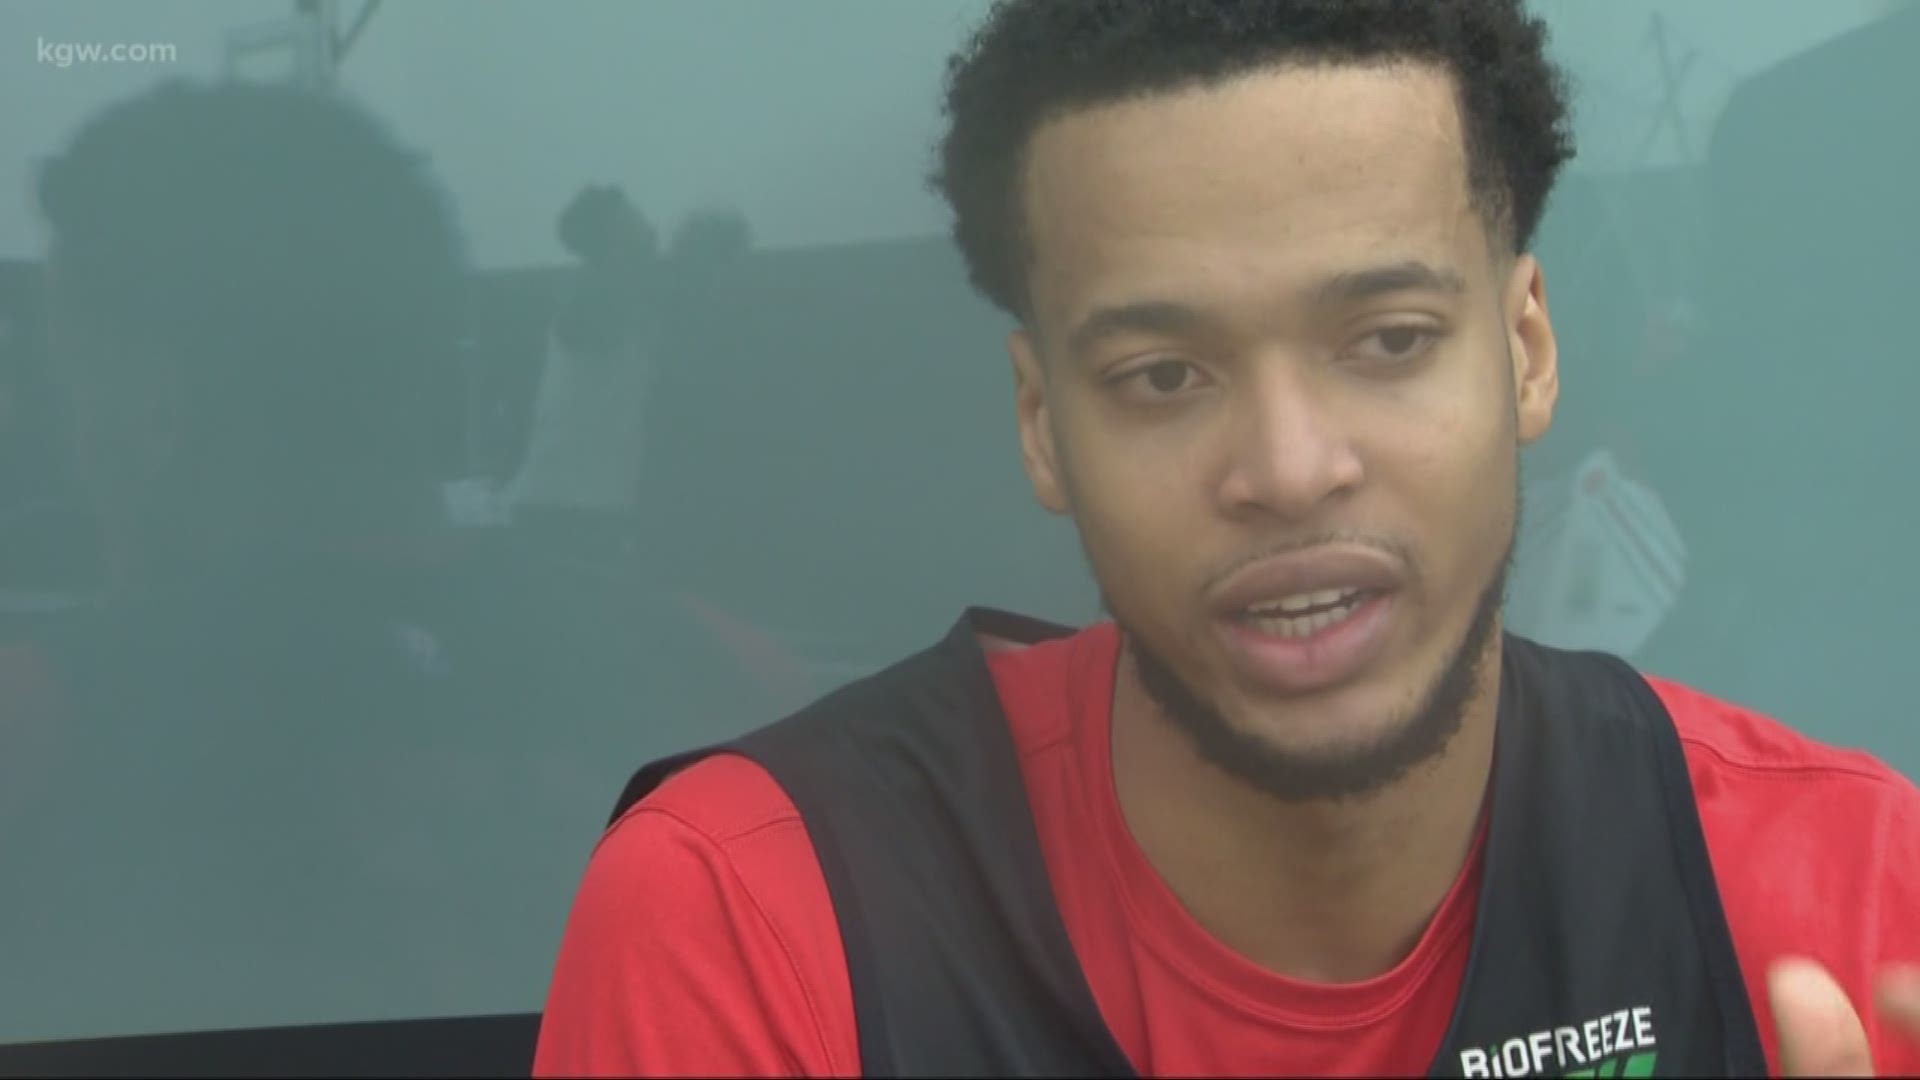 From the rubble to the NBA,  Blazers forward Skal Labissiere believes he’s lucky to be alive.

When he was 13 years old, he survived a 7.0 magnitude earthquake in his home country of Haiti.  Labissiere, his mother and brother were trapped under the aftermath of his home collapsing for nearly three hours.

“We were stuck under there praying, hearing people going crazy outside, we’re trying to scream for help but no one could hear us,” he says.  “In my mind, I’m about to die.”

Labissiere tells his story in his own words, edited by KGW photographer Cory Long.